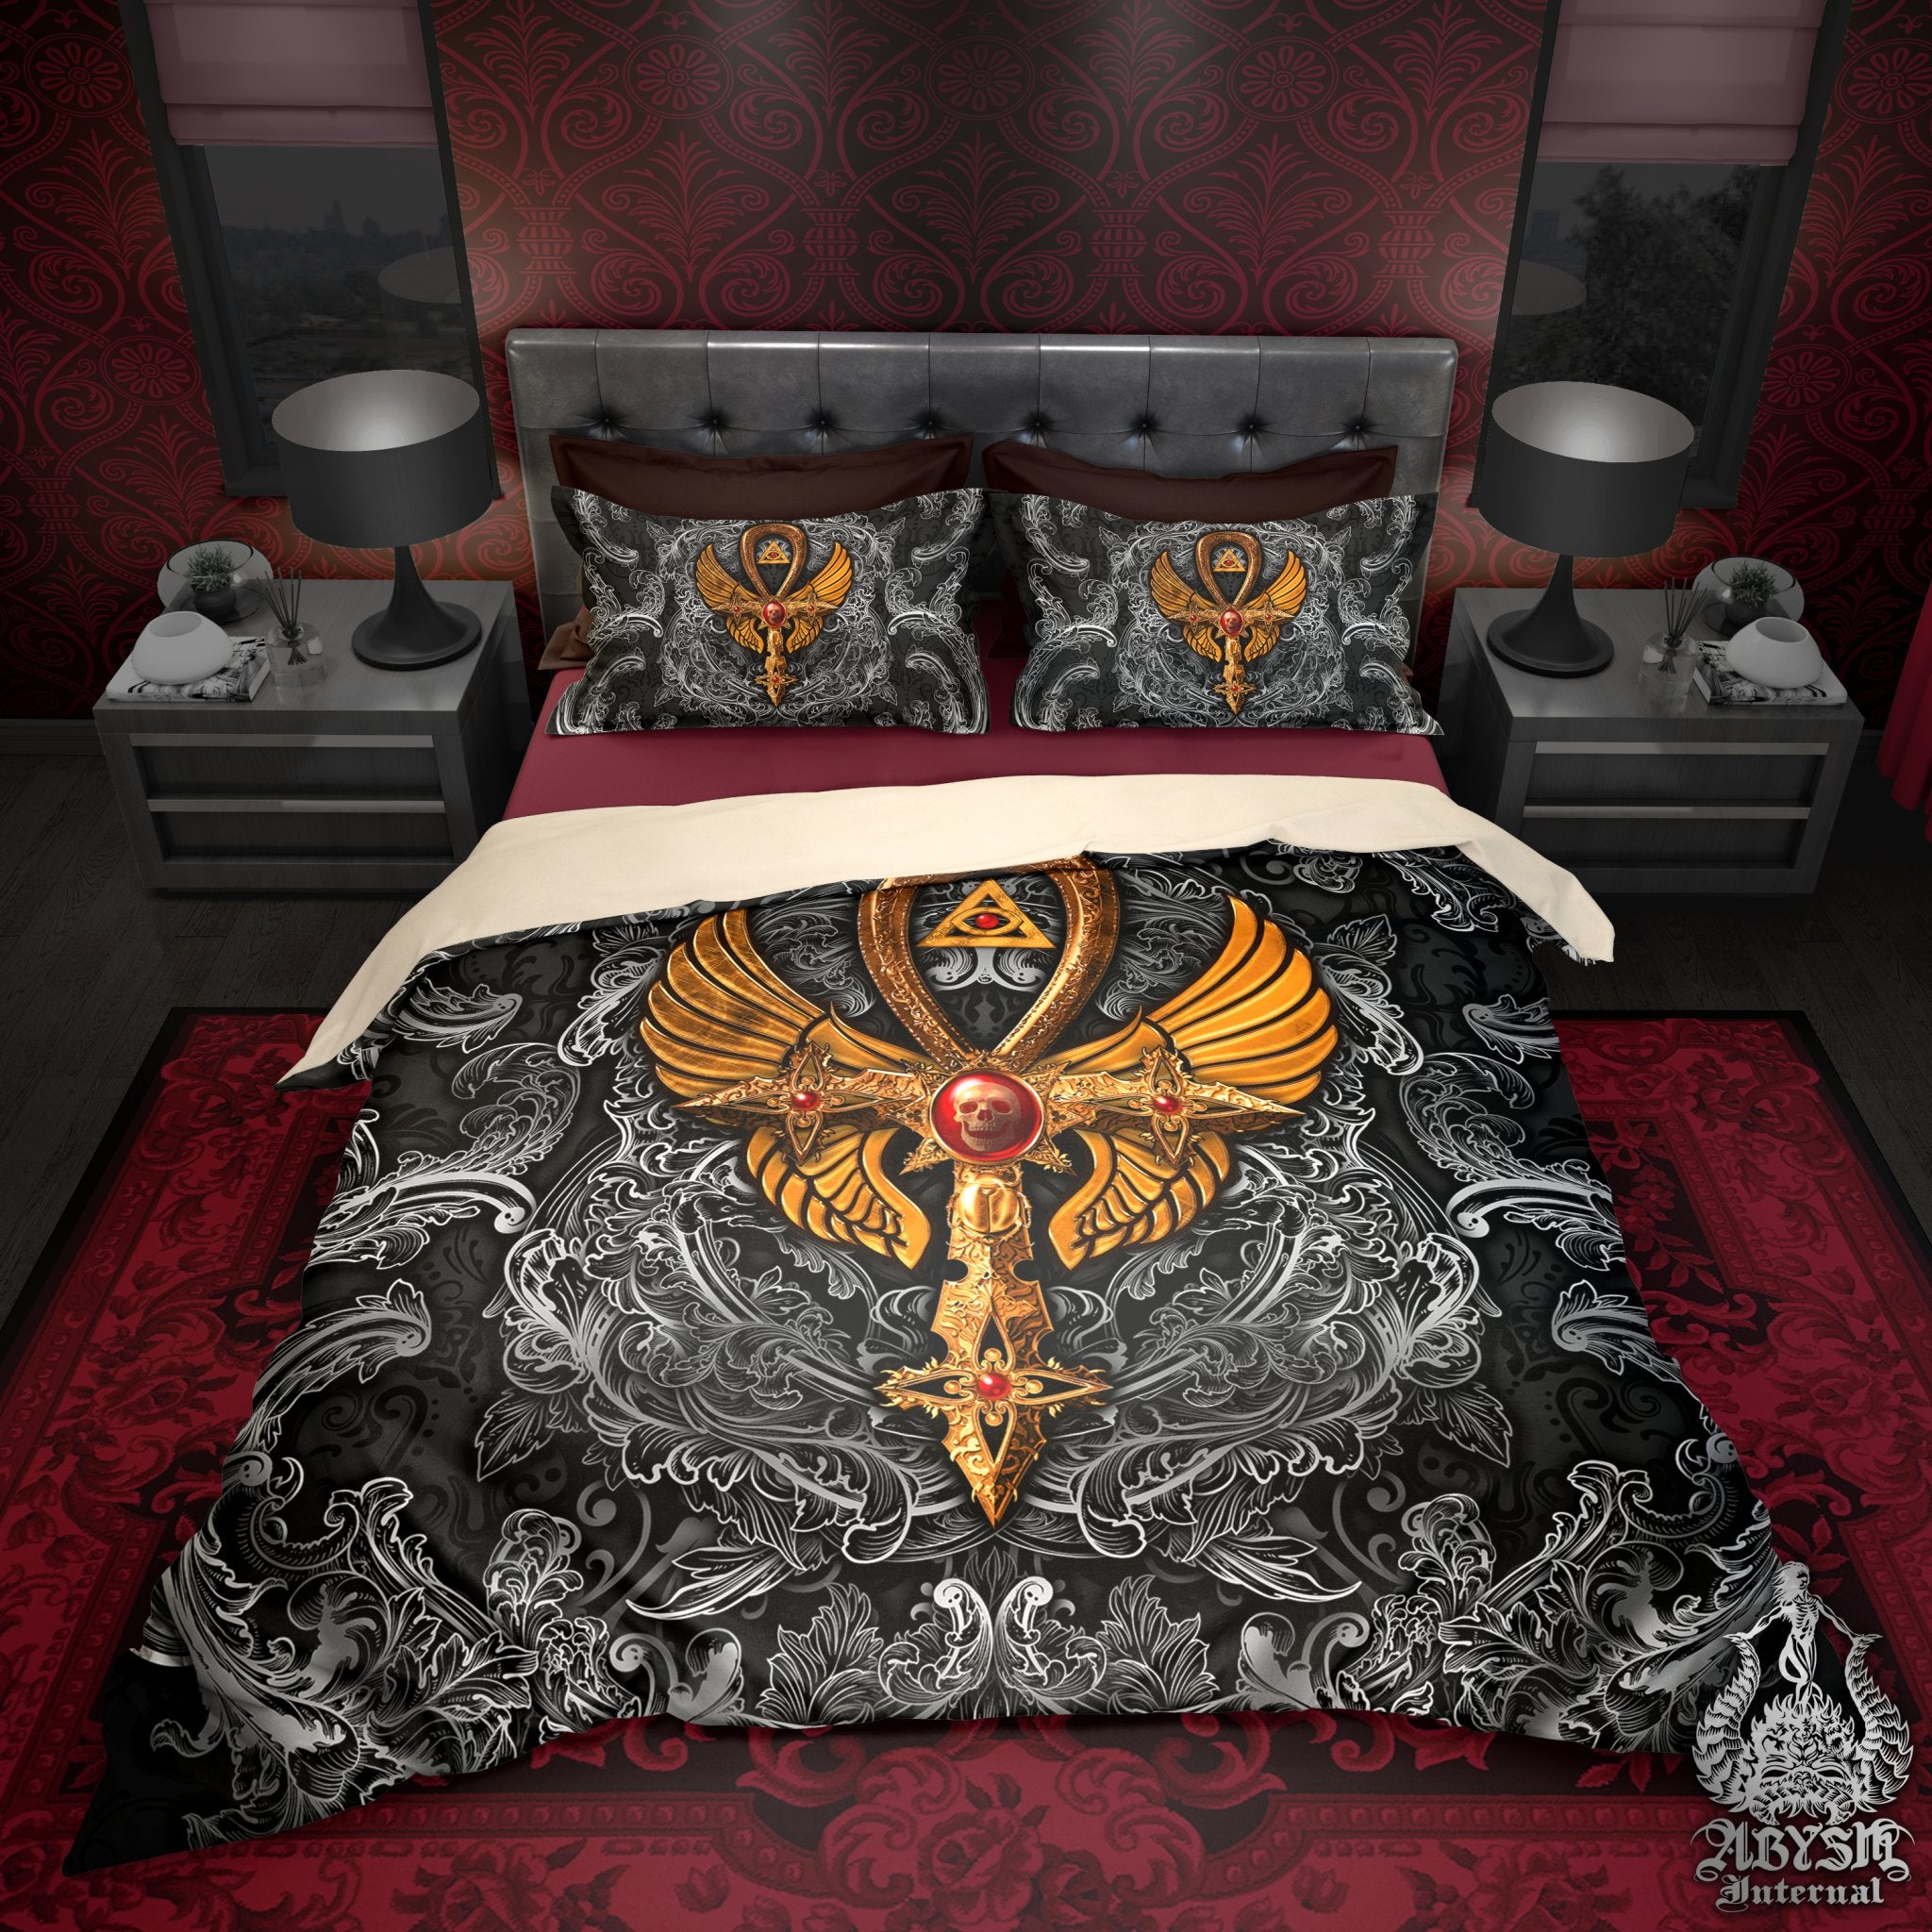 Gothic Comforter or Duvet, Dark Ankh Bed Cover, Goth Bedroom Decor, King, Queen & Twin Bedding Set - Black with Red, Gold or White, 3 Colors - Abysm Internal